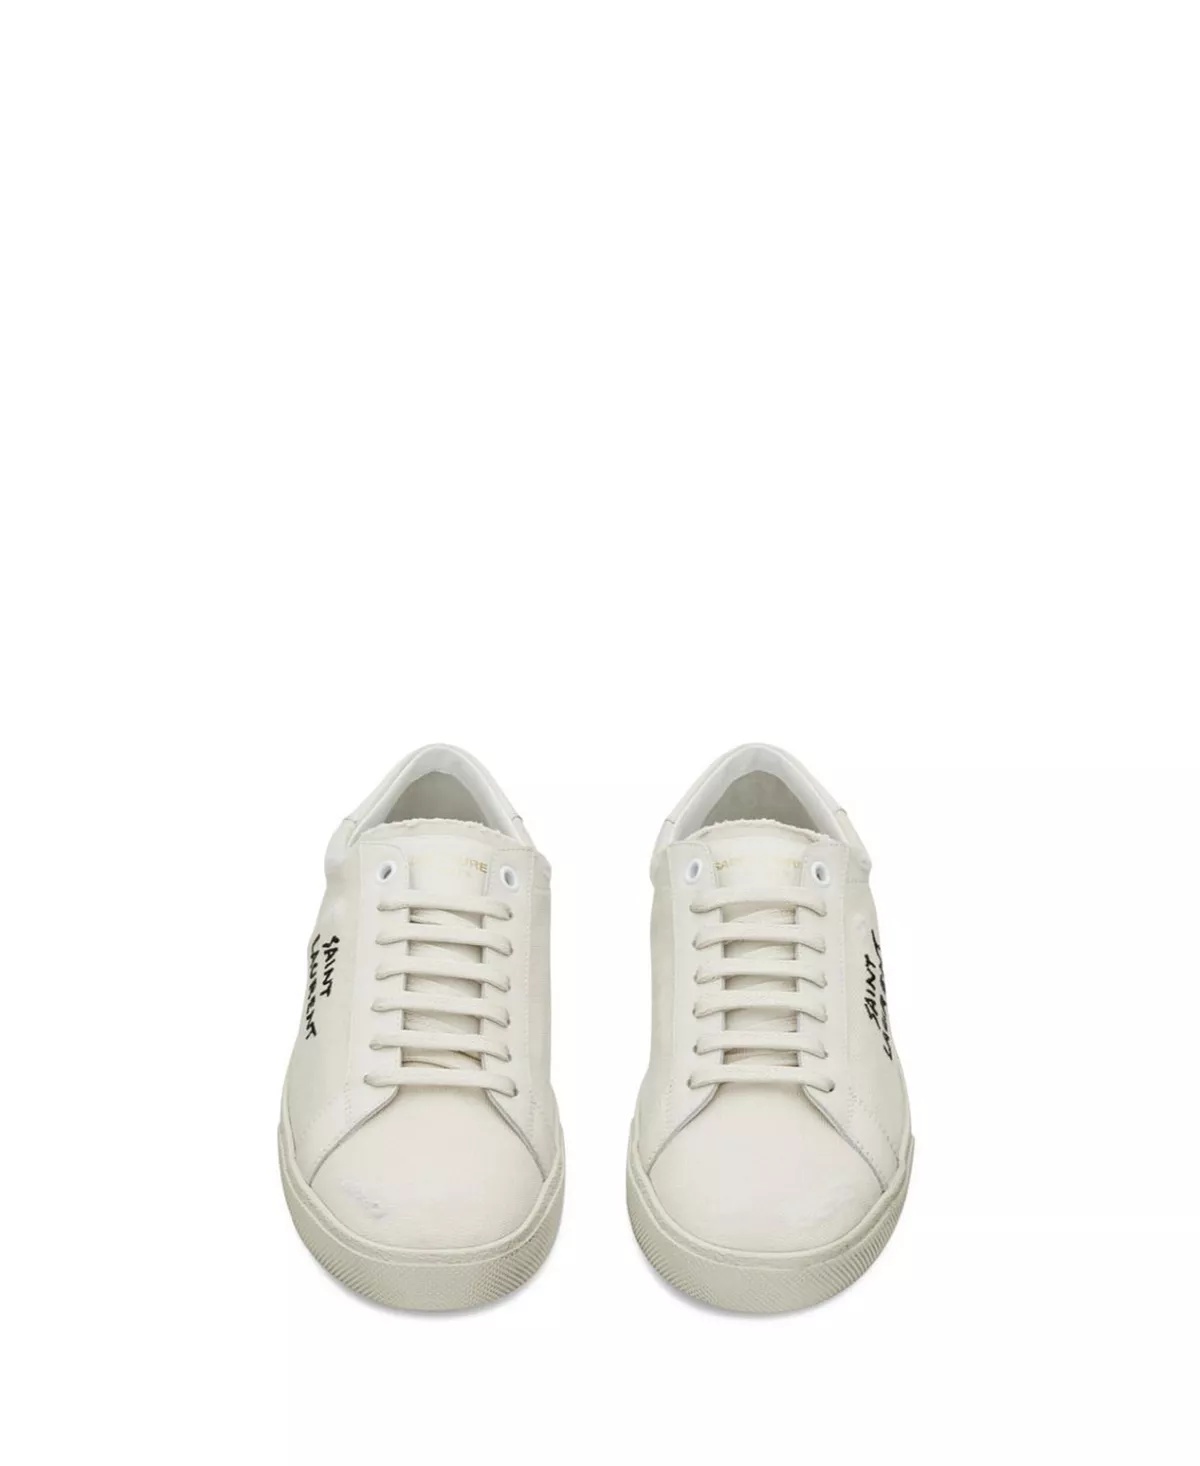 Court Classic Sl/06 Embroidered Sneakers in Canvas and Leather - 2